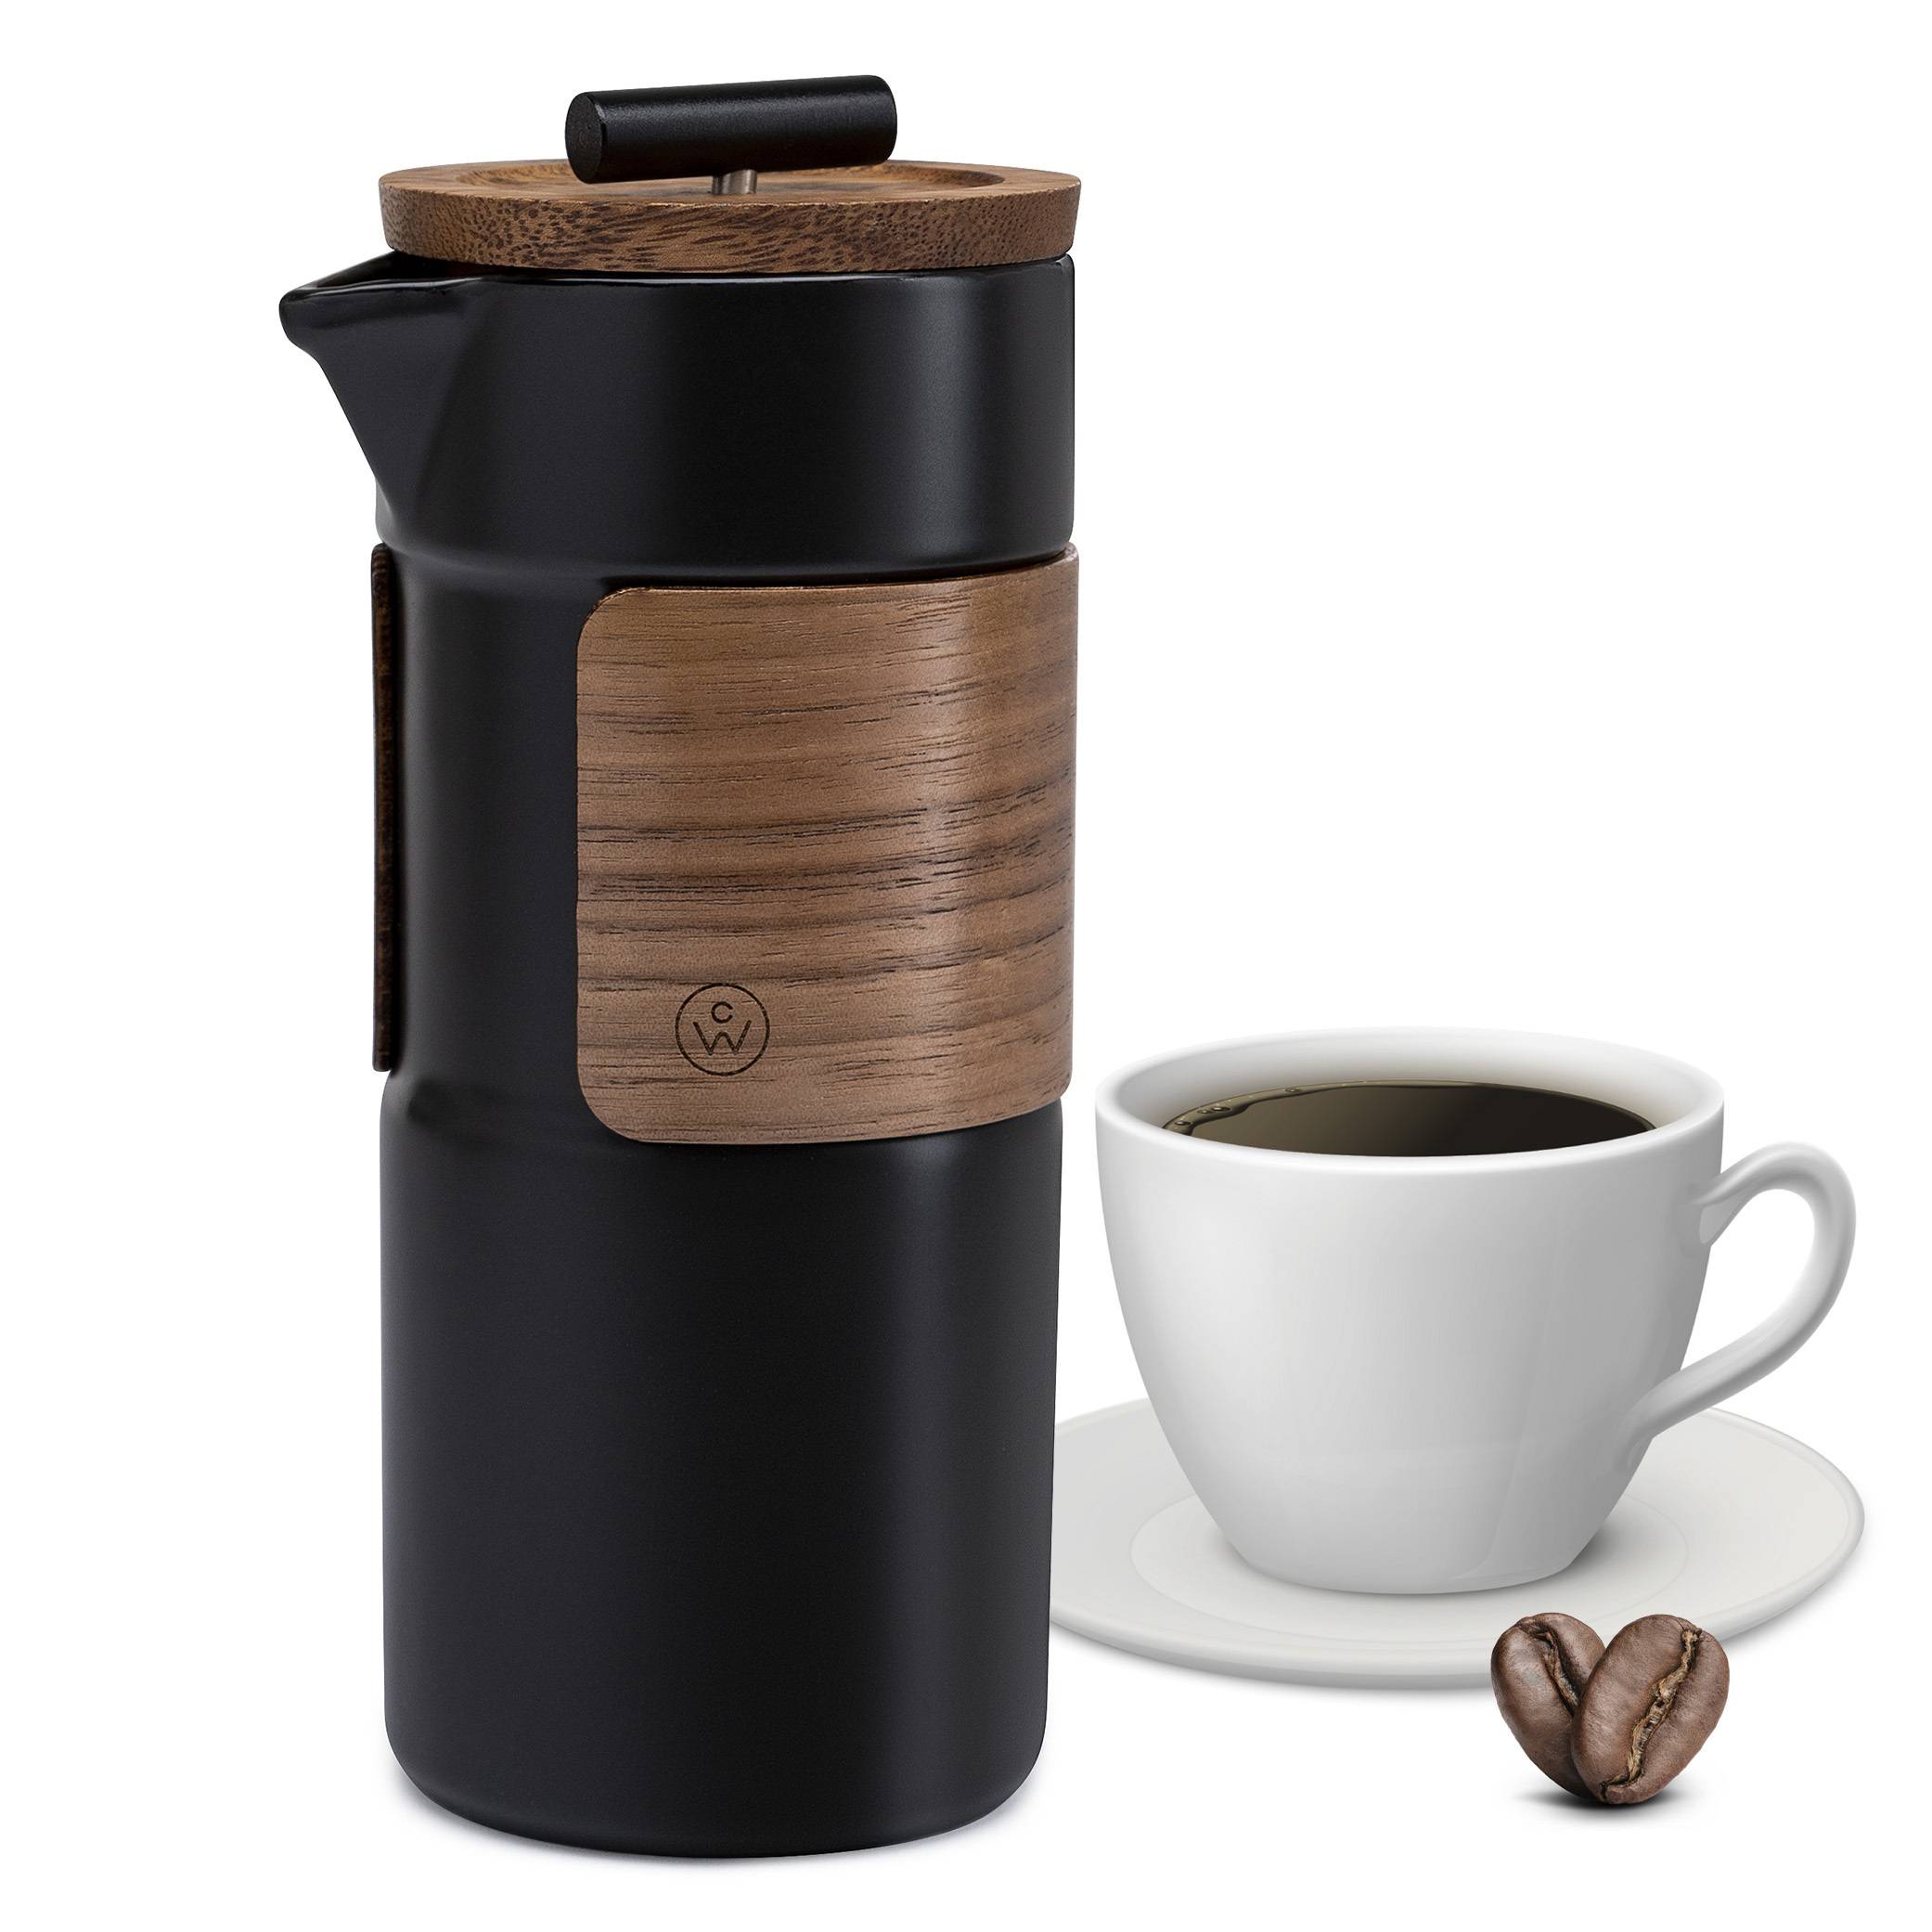 ChefWave Artisan Series Travel French Press Coffee Maker with Bamboo Lid (16.5oz, Black)